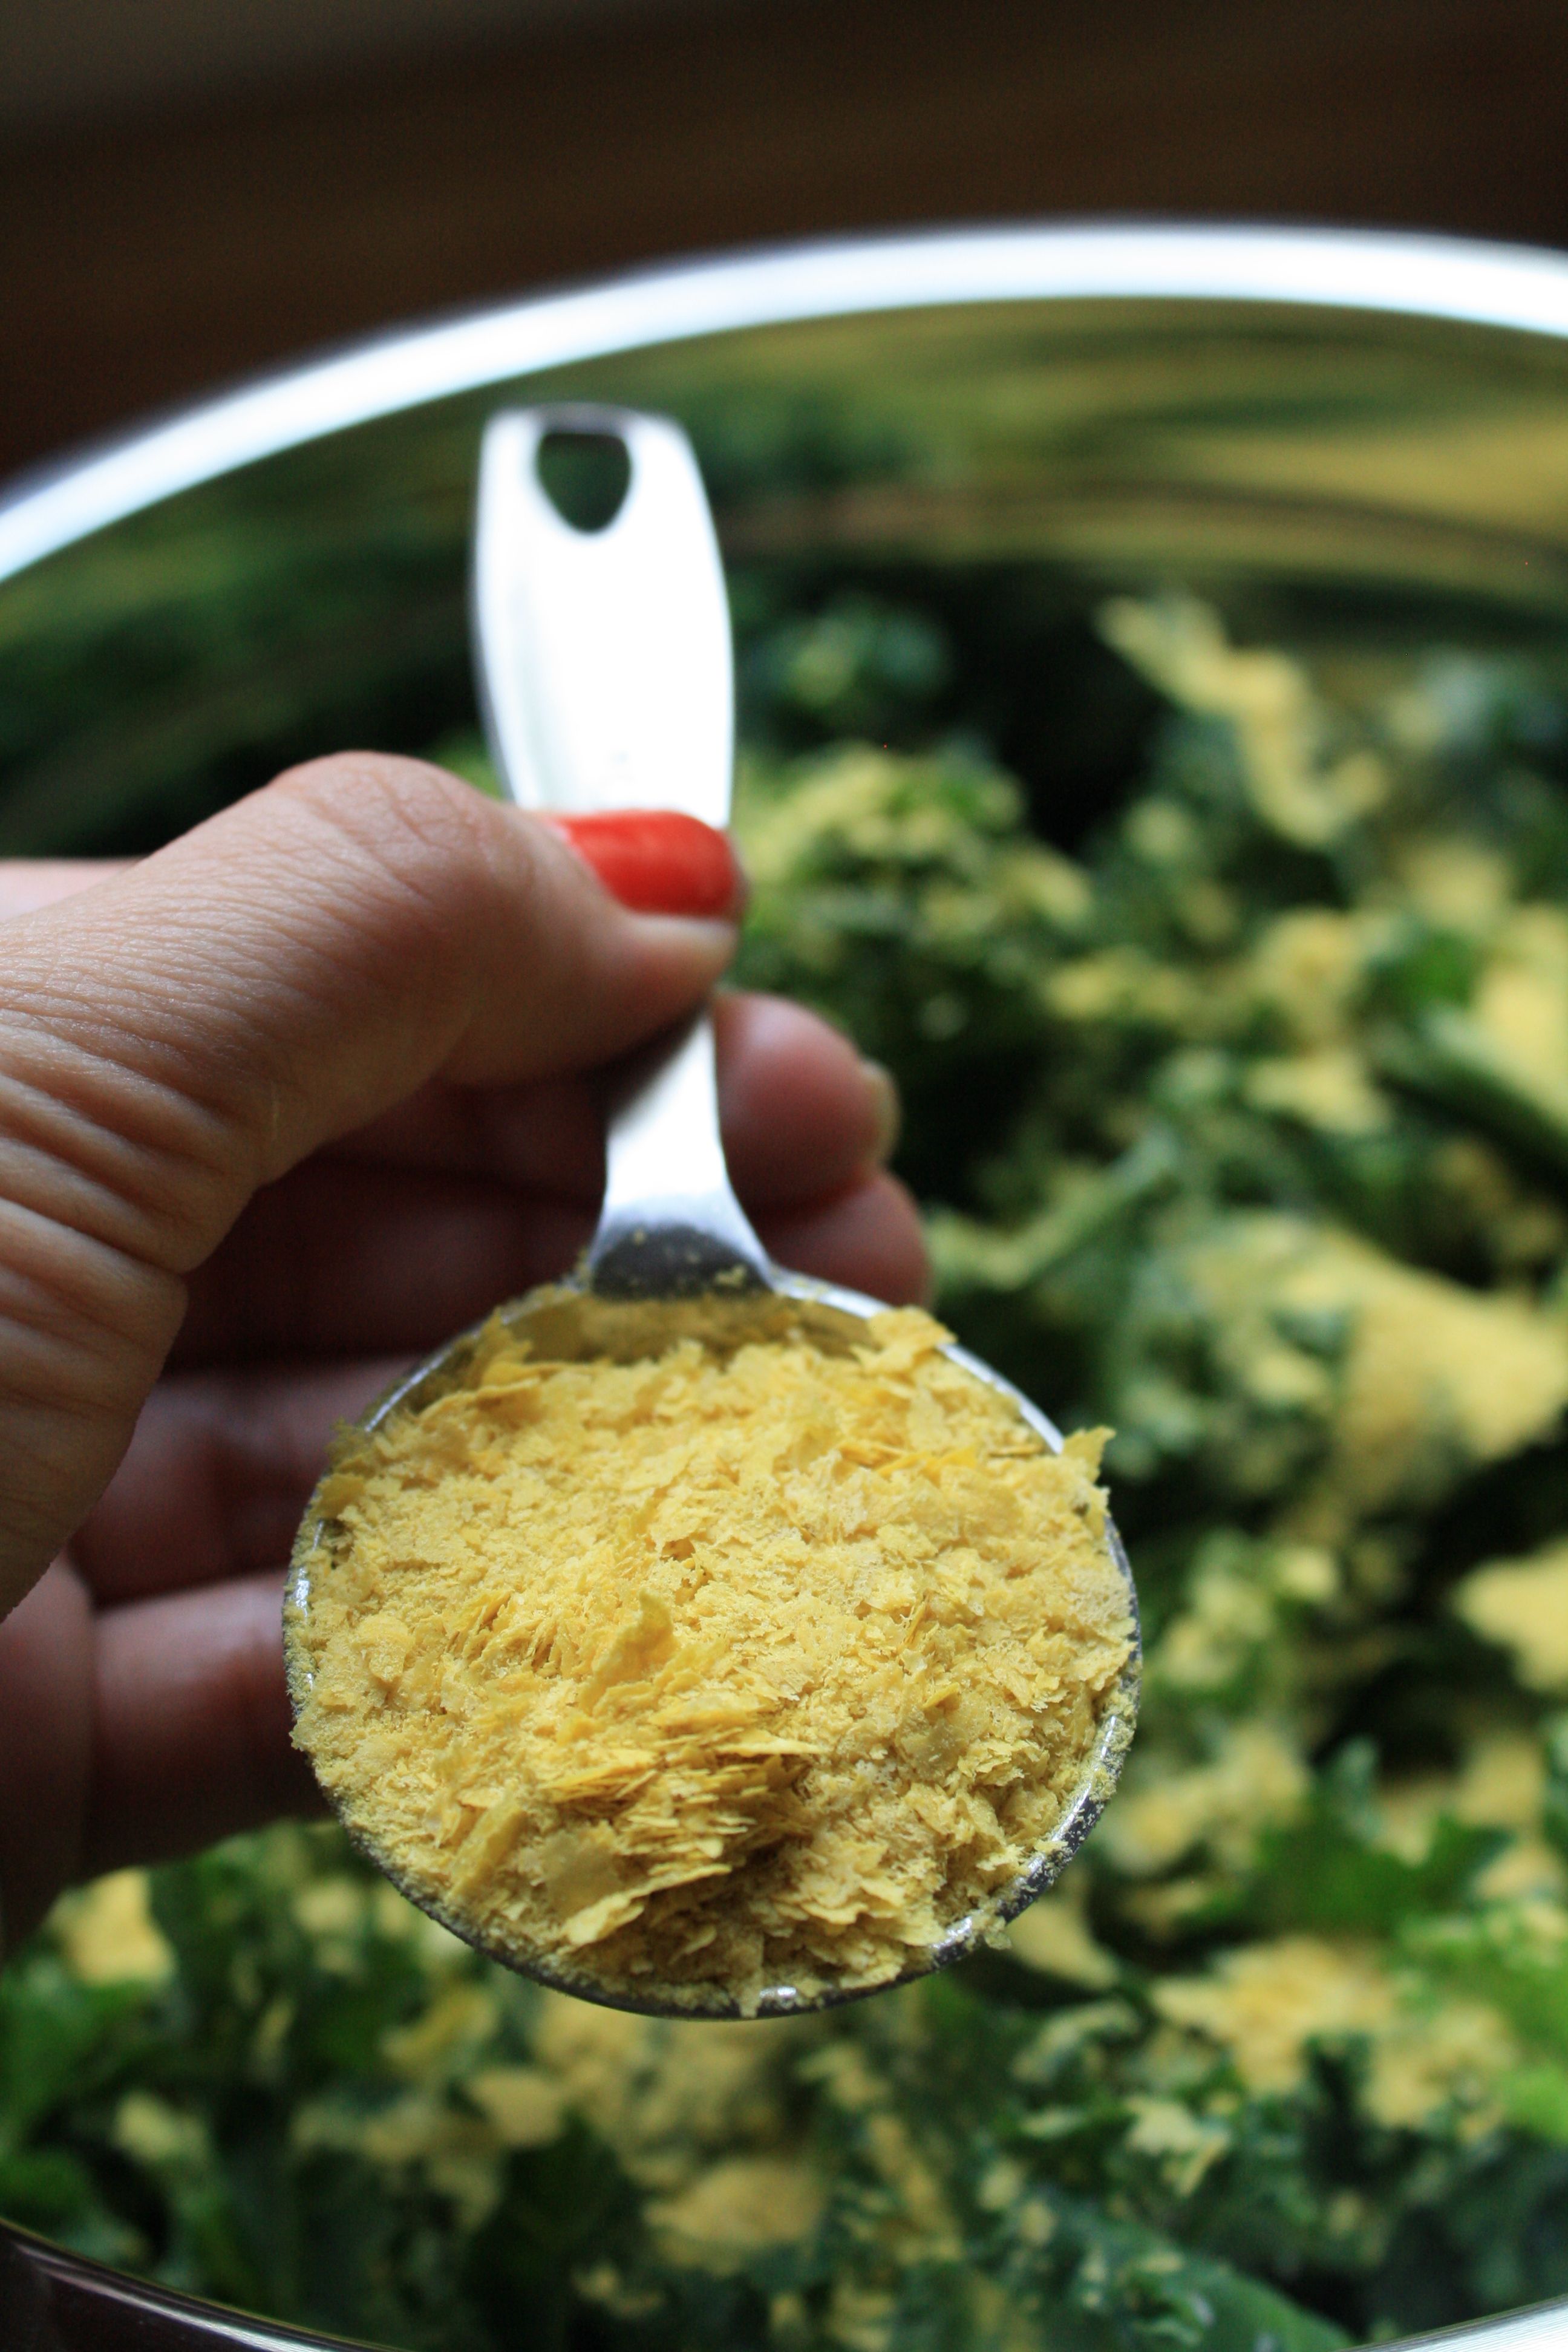 add 4 tablespoons nutritional yeast to kale leaves